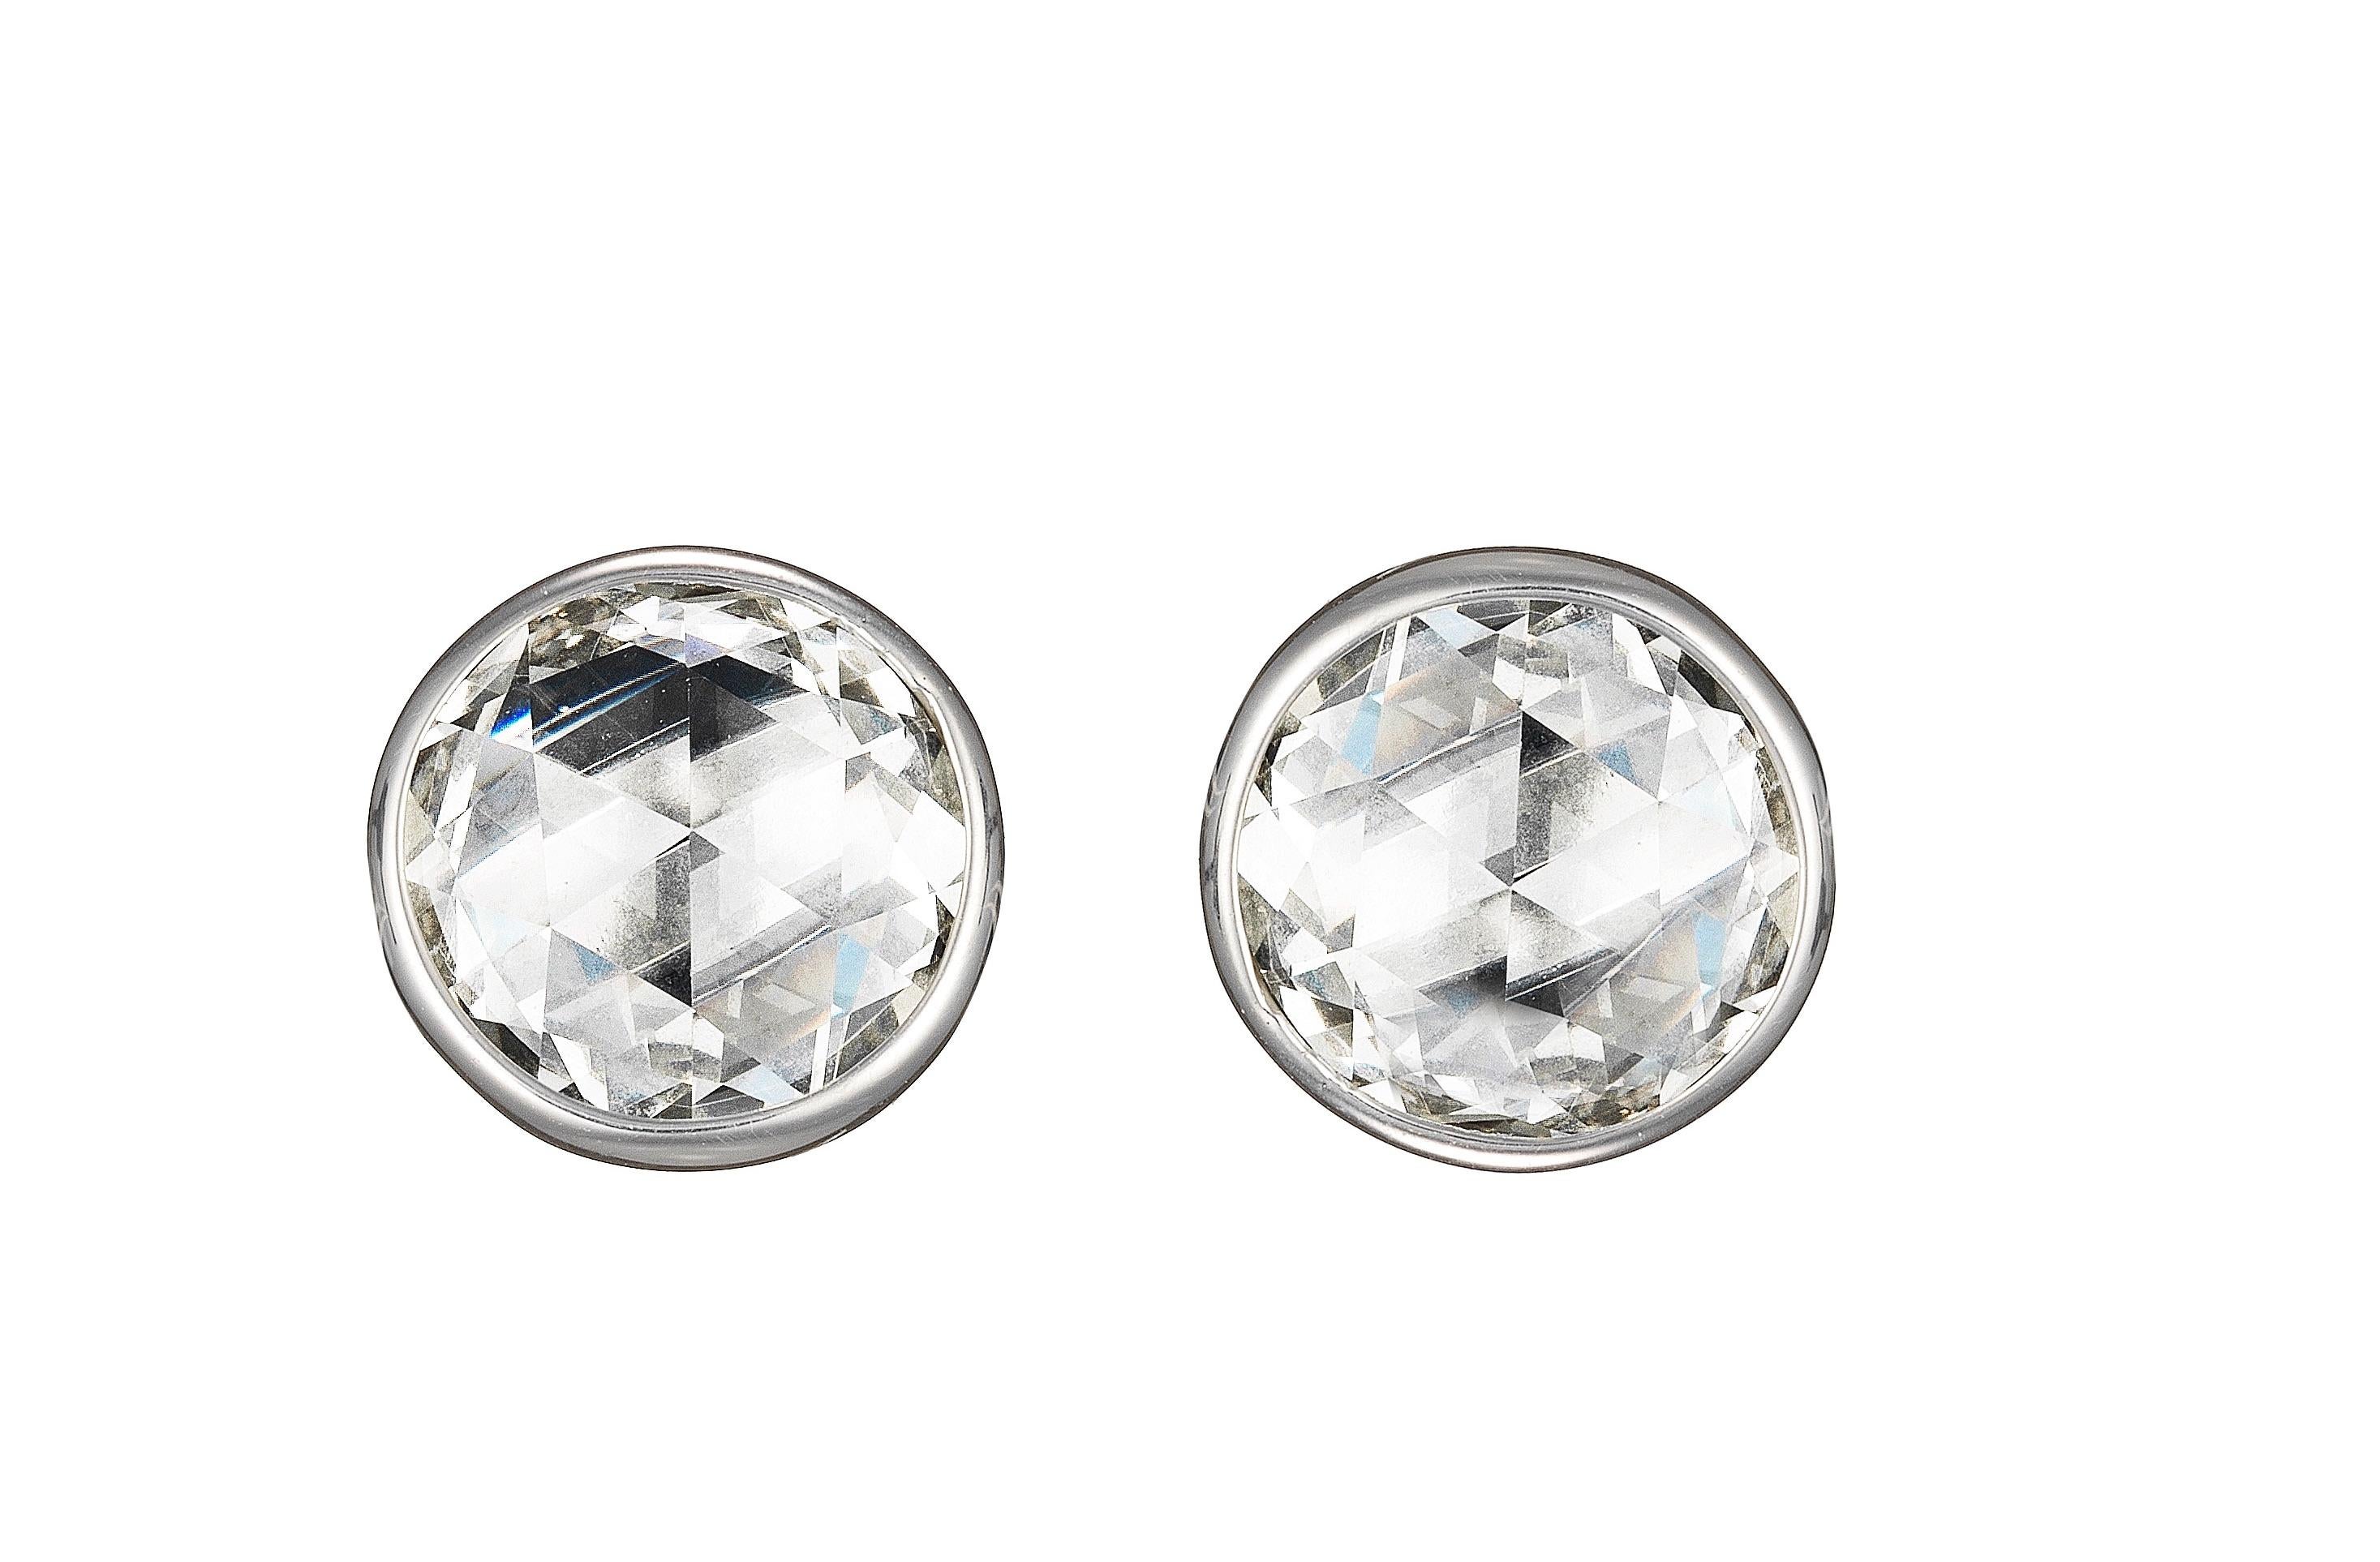 An alternative to the regular diamond stud, just as elegant but a little more relaxed.

18k gold 
3.5mm rose cut diamonds 
0.28cts total diamond weight 
complimentary domestic ground shipping 

NB: All of our jewelry is lovingly hand made in NYC. If